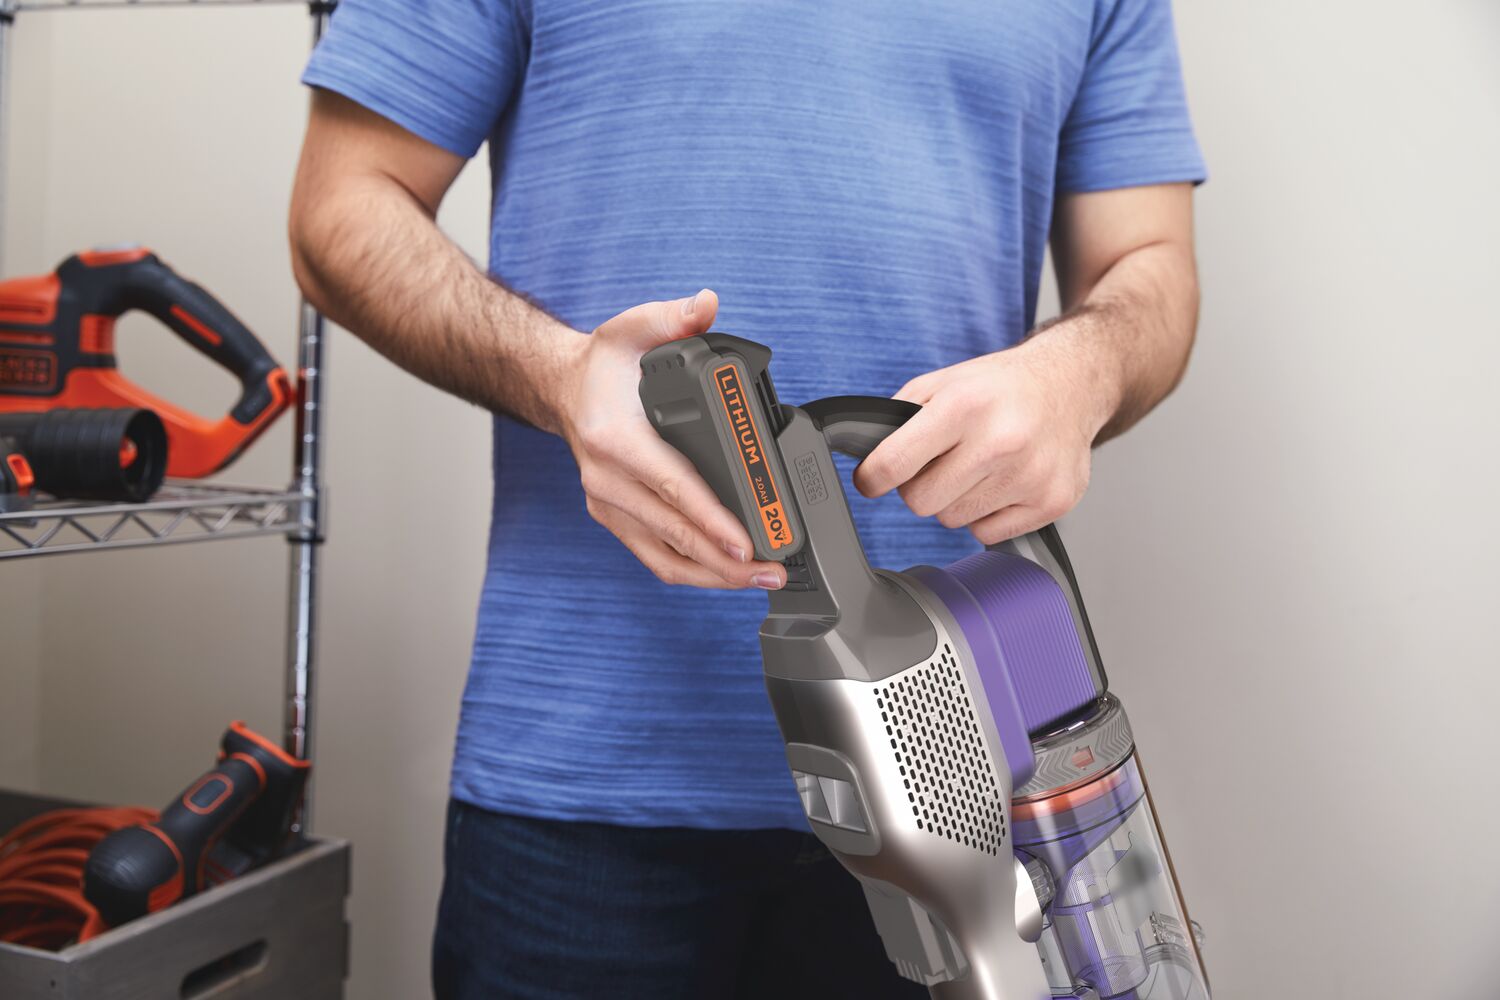 Removable battery feature of POWERSERIES Extreme pet cordless stick vacuum cleaner.